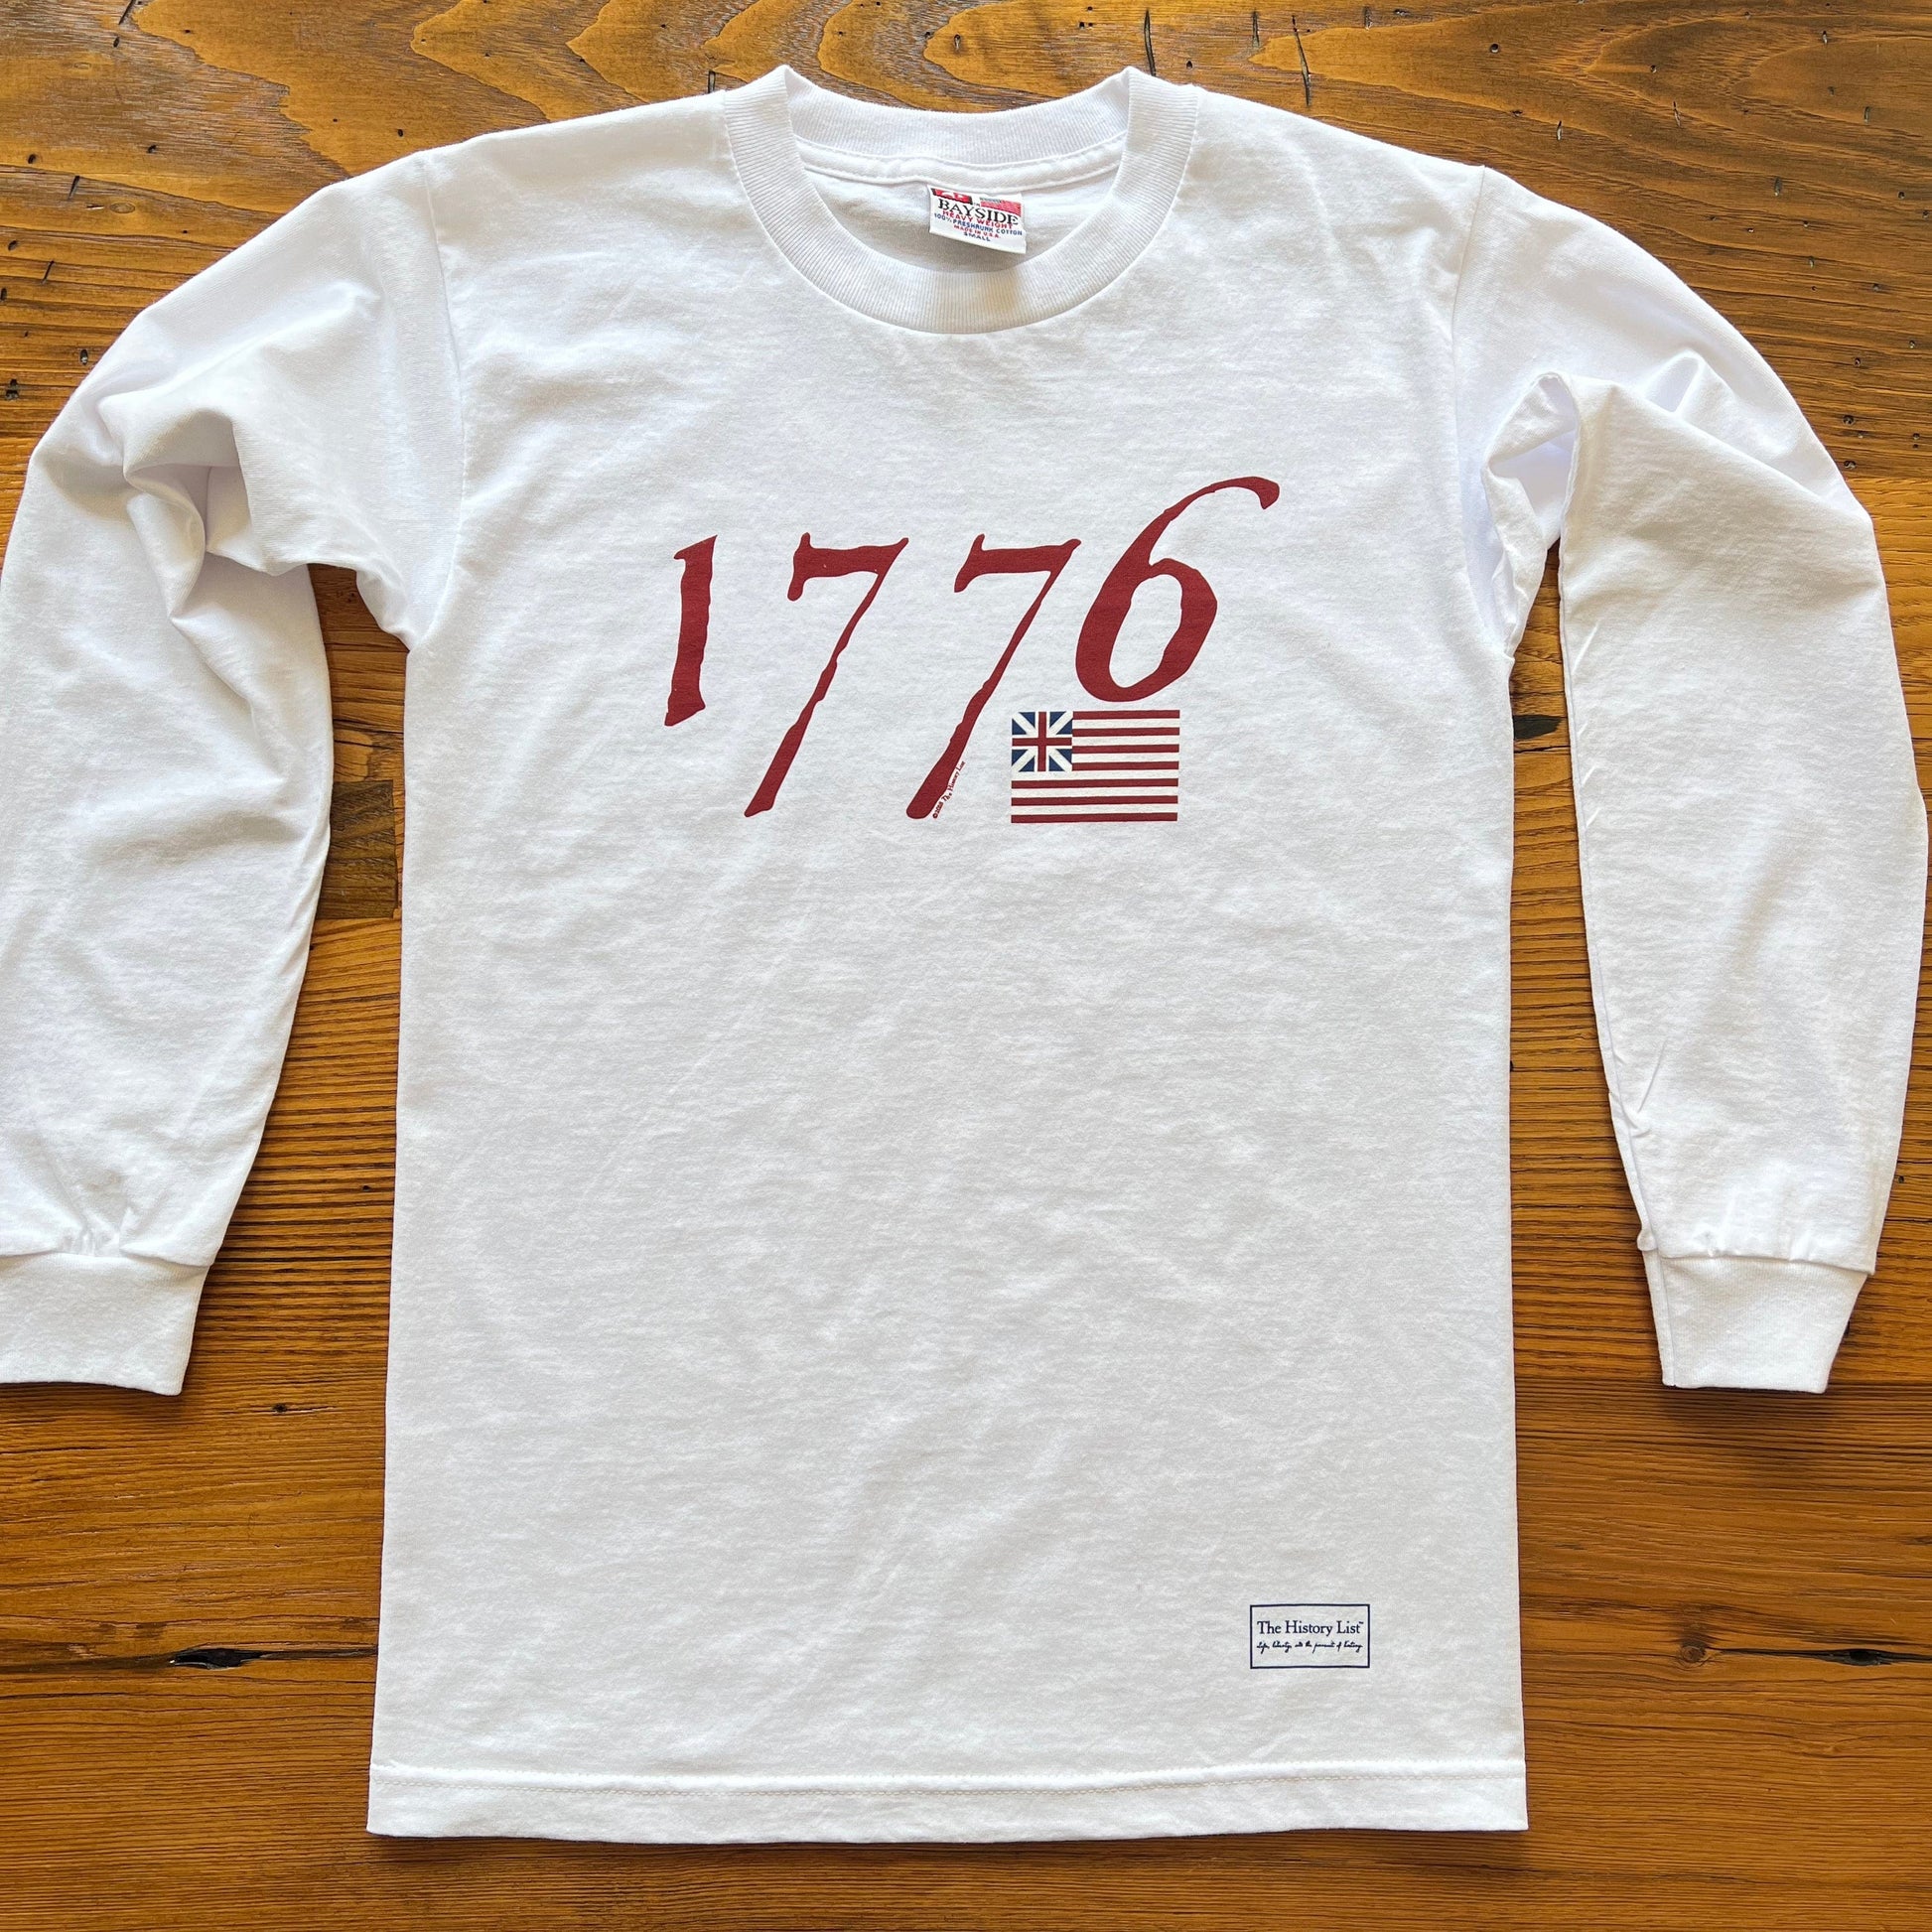 We Hold These Truths - July 4, 1776” Long-Sleeved Shirt White / L